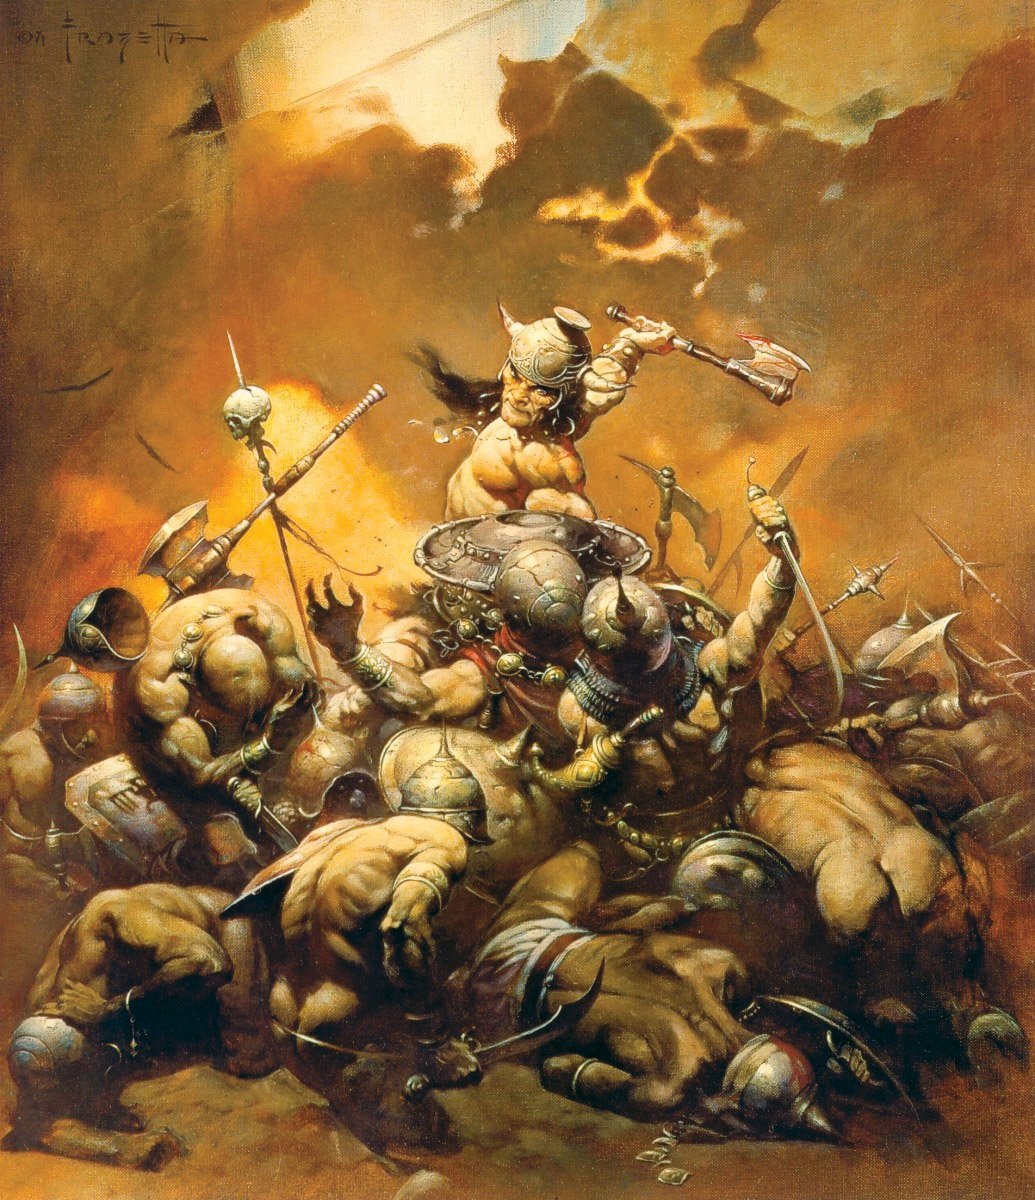 For example in 2012 an original Conan painting was sold for $1 million; six years later Frazetta's Death Dealer went for $1.7 million.